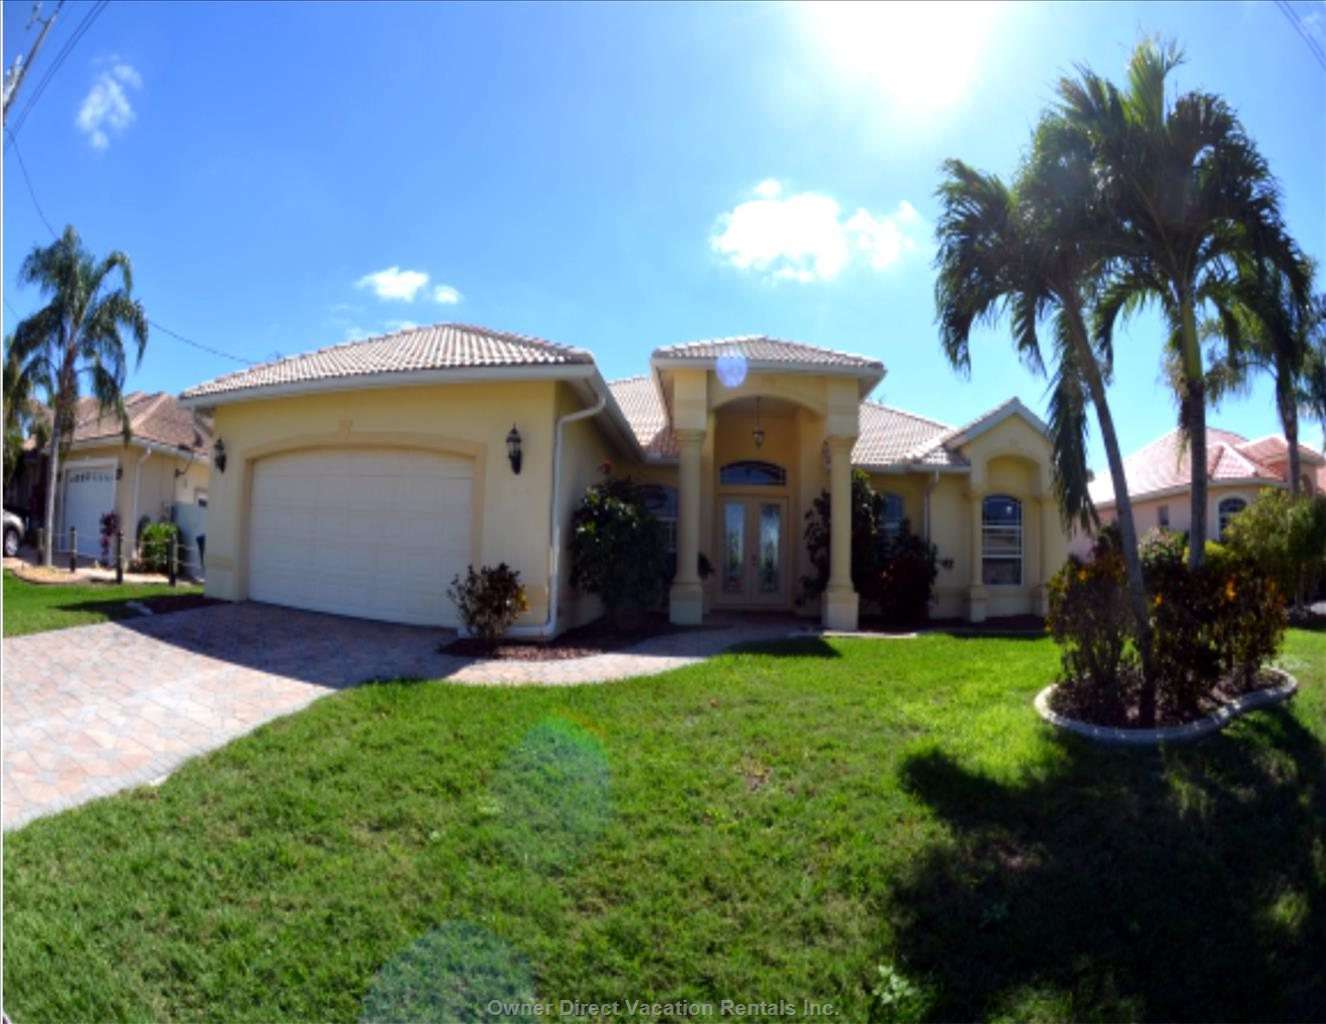 Vacation Rentals by Owner in Cape Coral